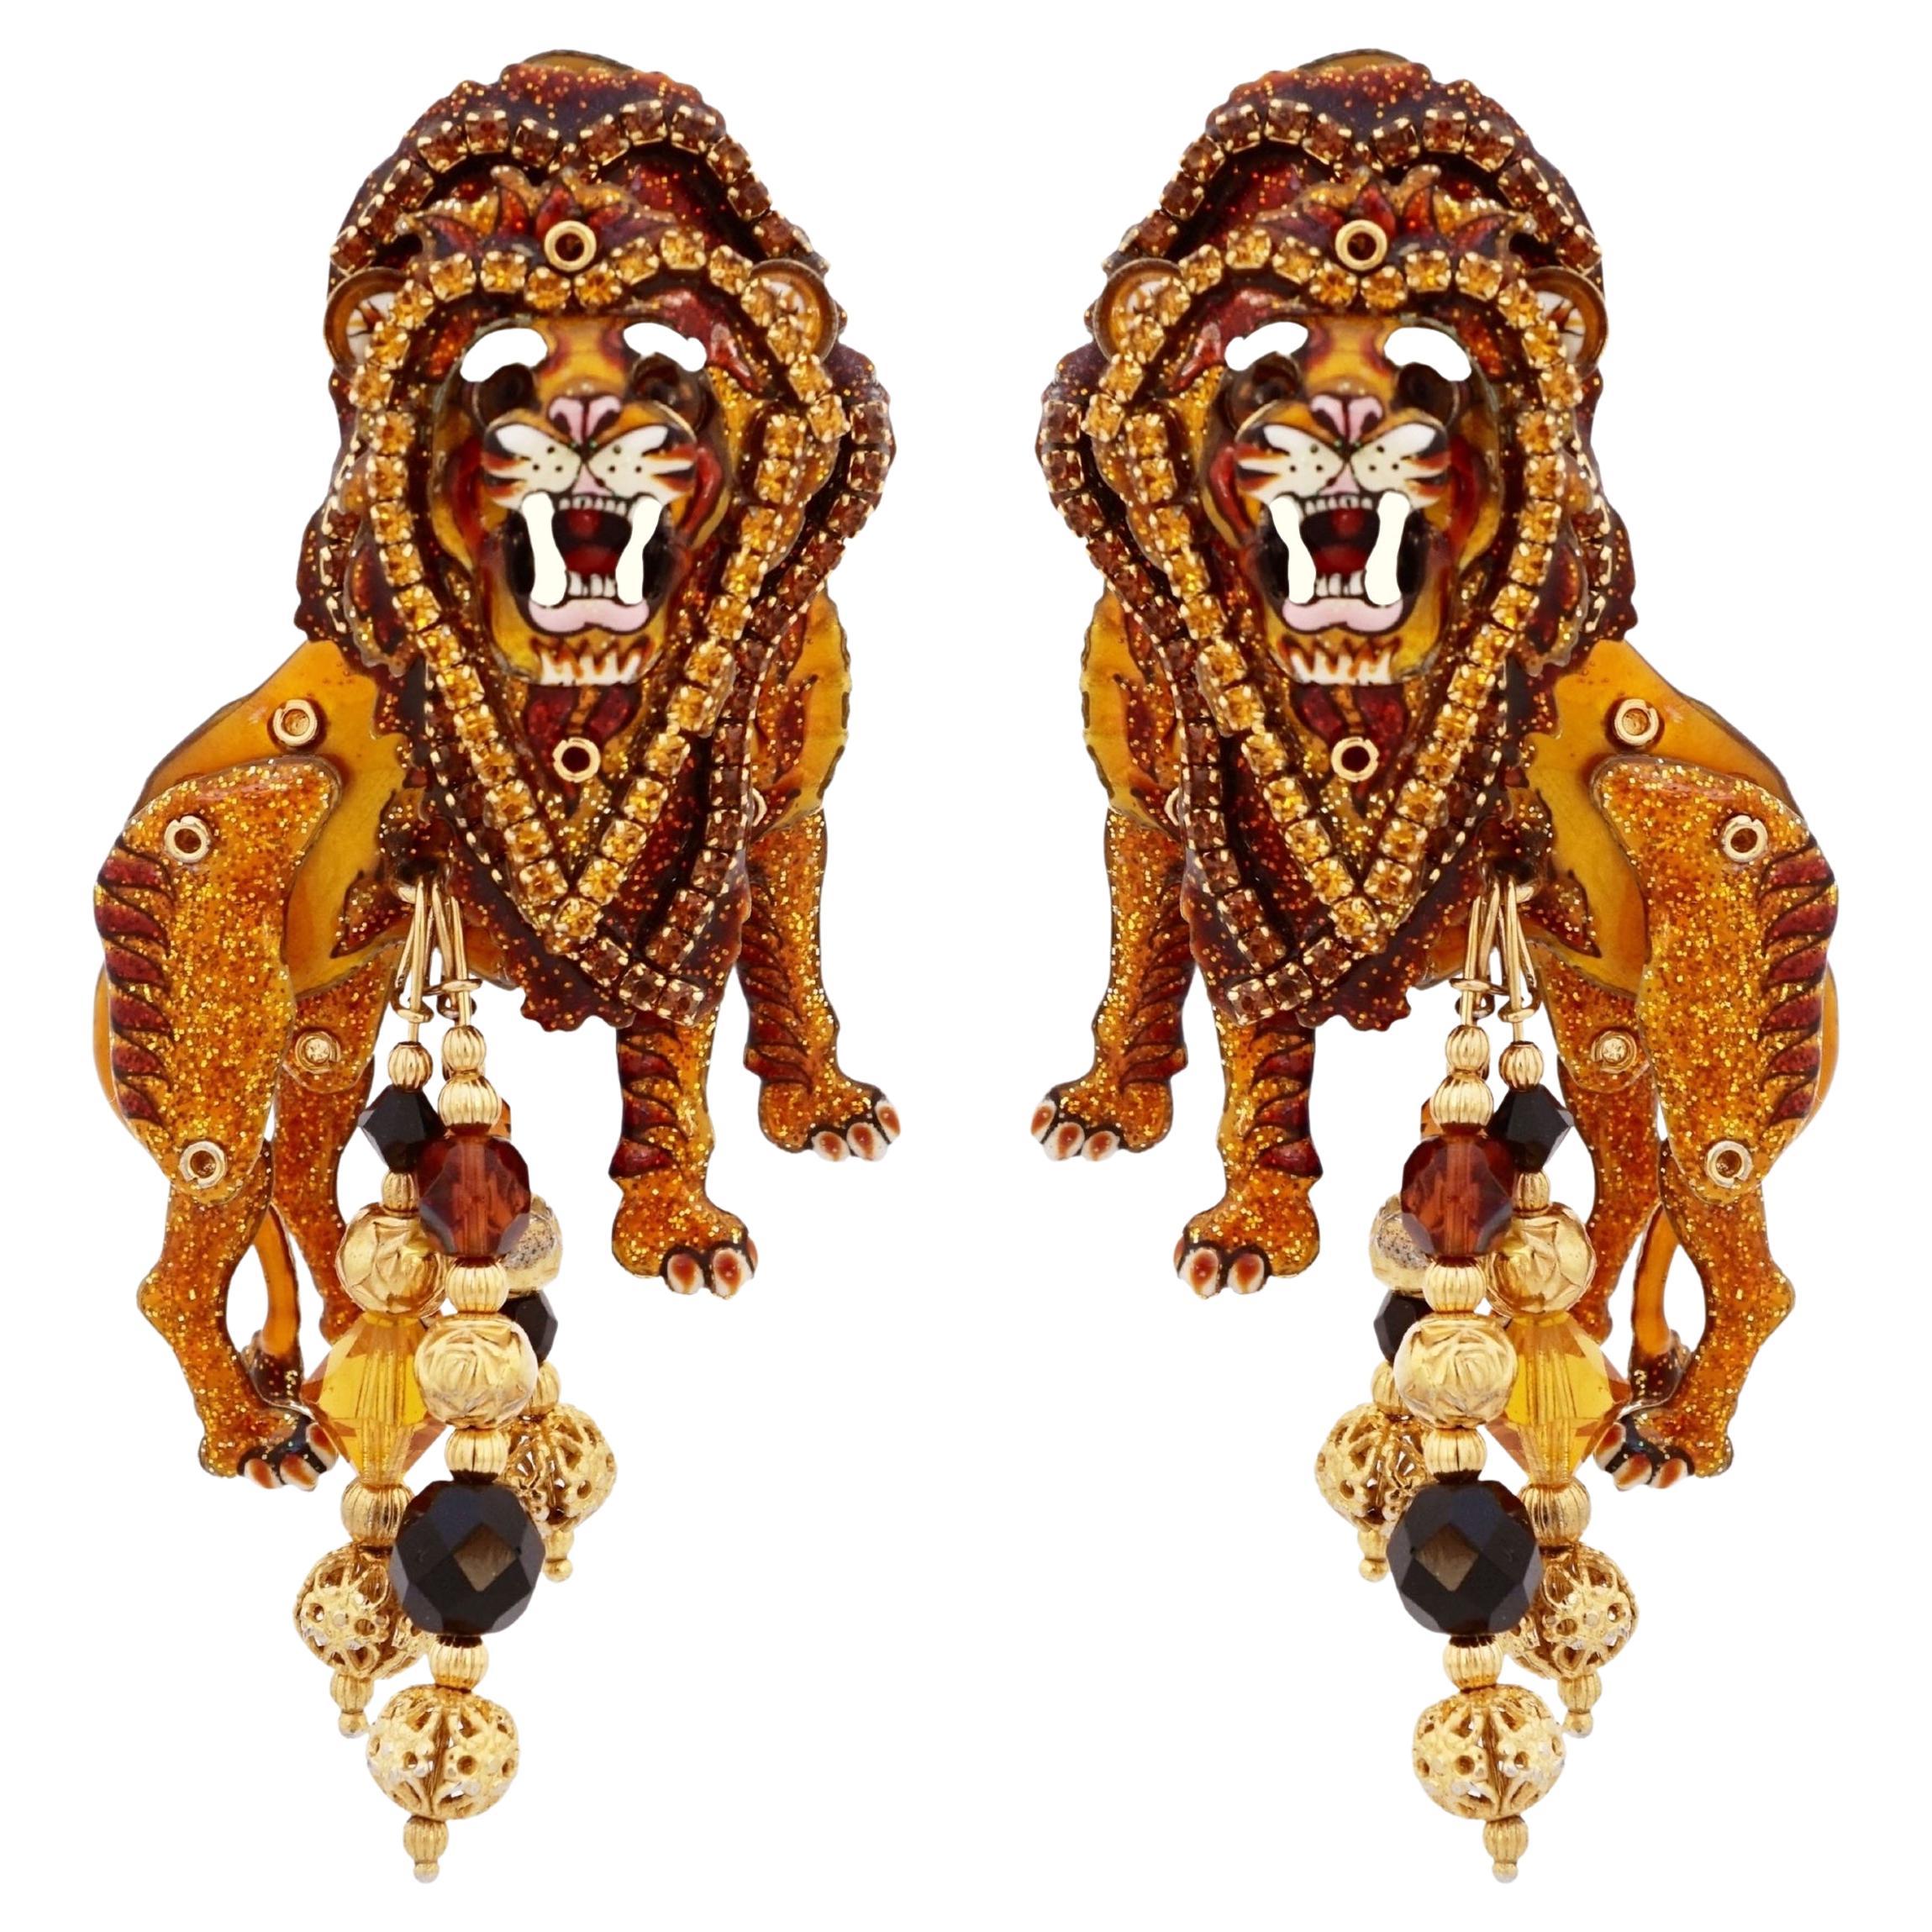 Enamel Marionette "Wild Cats" Lion Statement Earrings By Lunch At The Ritz For Sale